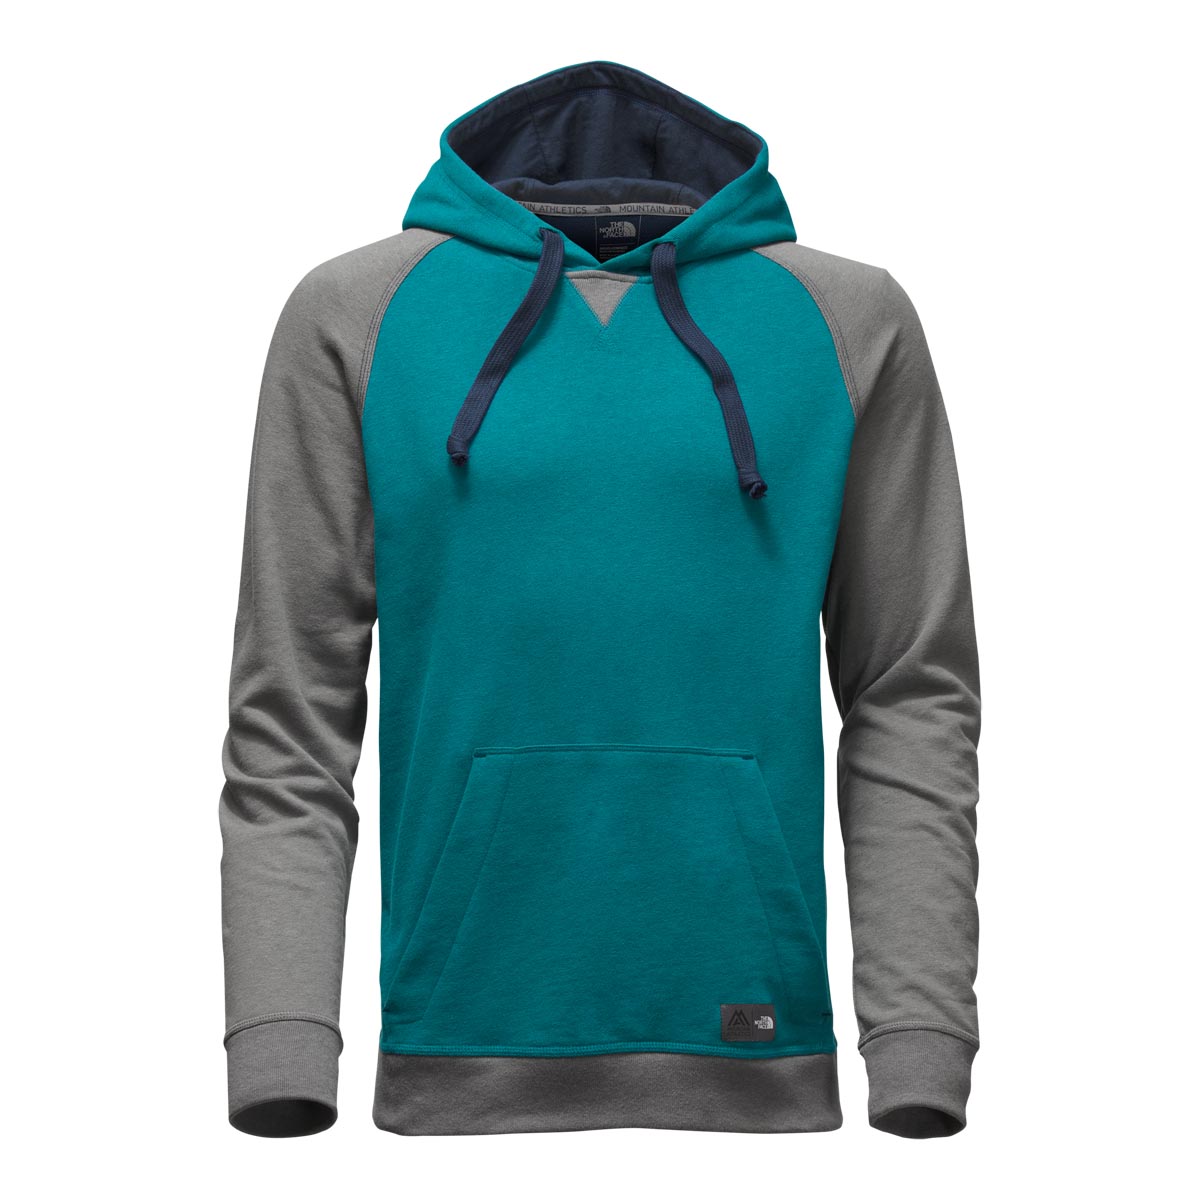 The North Face Men's Wicker Hoodie